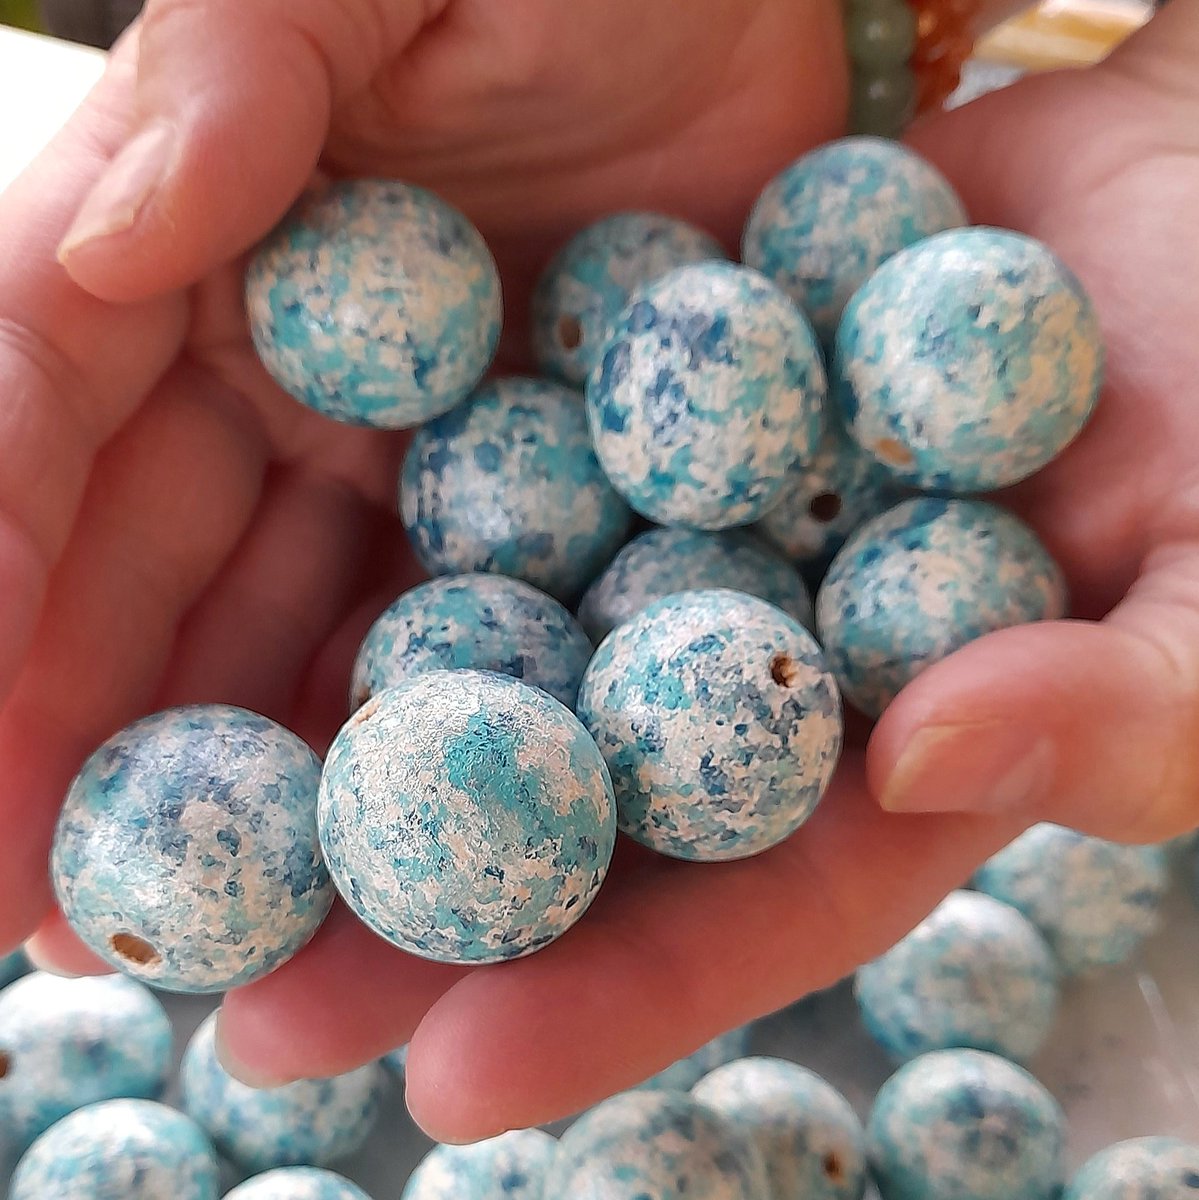 Bringing Wood Beads to Life! 🎨✨
#woodbeads #handpaintedjewelry #craftingwithlove #artisanmade #handmadeaccessories #woodart #wearableart #creativehappylife
Discover the beauty of hand-painted wooden beads!
labyswitzerland.etsy.com